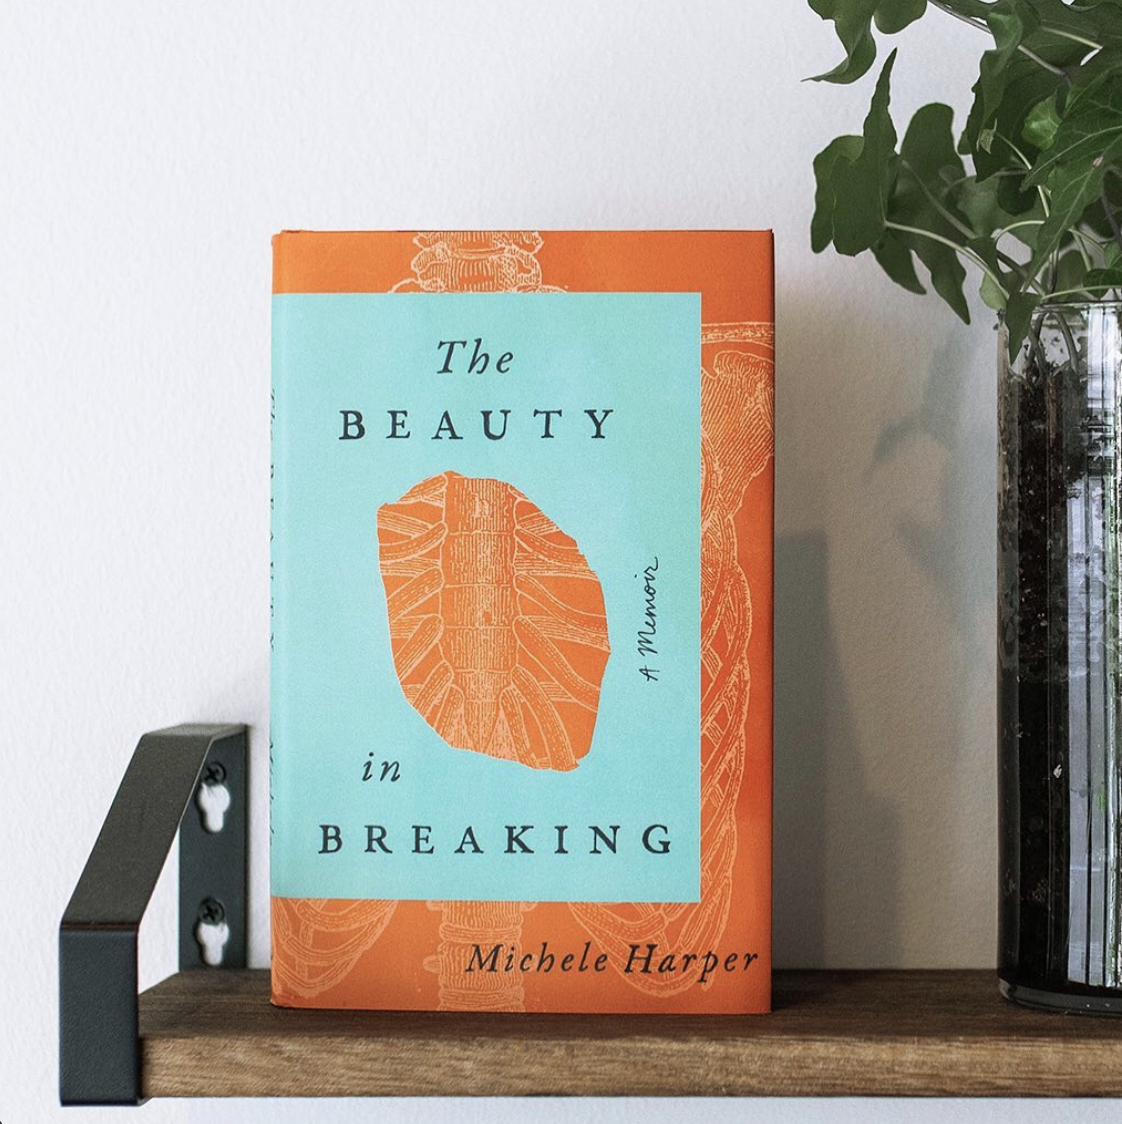 An upright copy of The Beauty in Breaking on a bookshelf with the cover showing an outline of a skeleton peeking through a teal rectangle with a hole in it